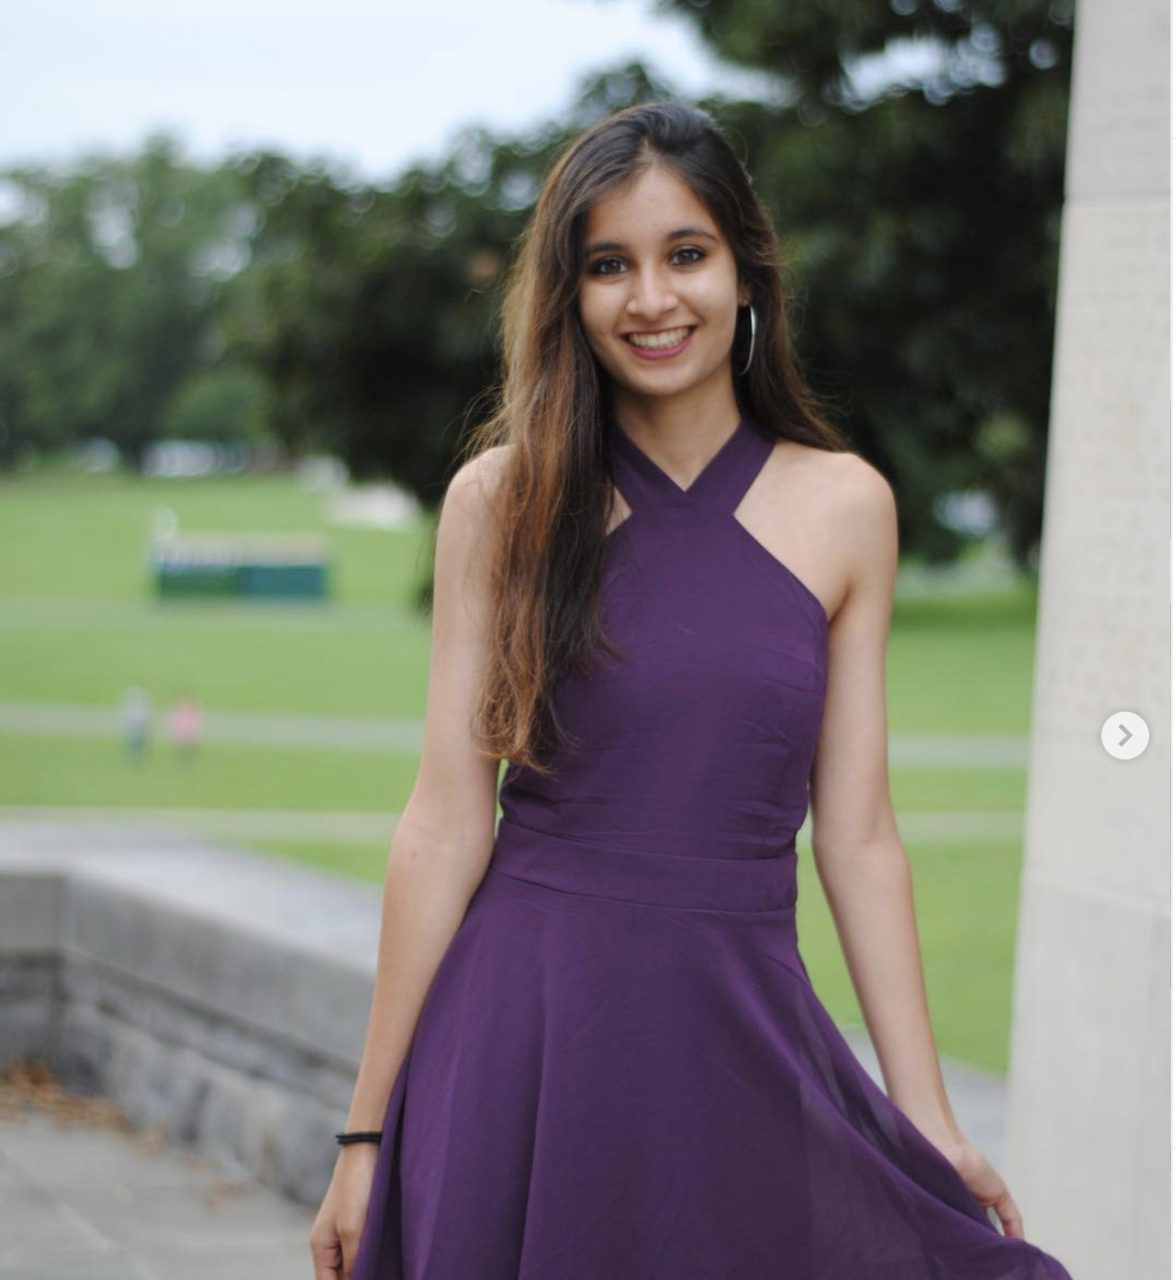 Congratulations to #HiredHokie Shreya Kiran Jain for accepting a job with JP Morgan Chase & Co. as software engineer! Her CS degree gave her the opportunity to learn how to be a leader through being a Computer Science Ambassador and working on the department's diversity board.